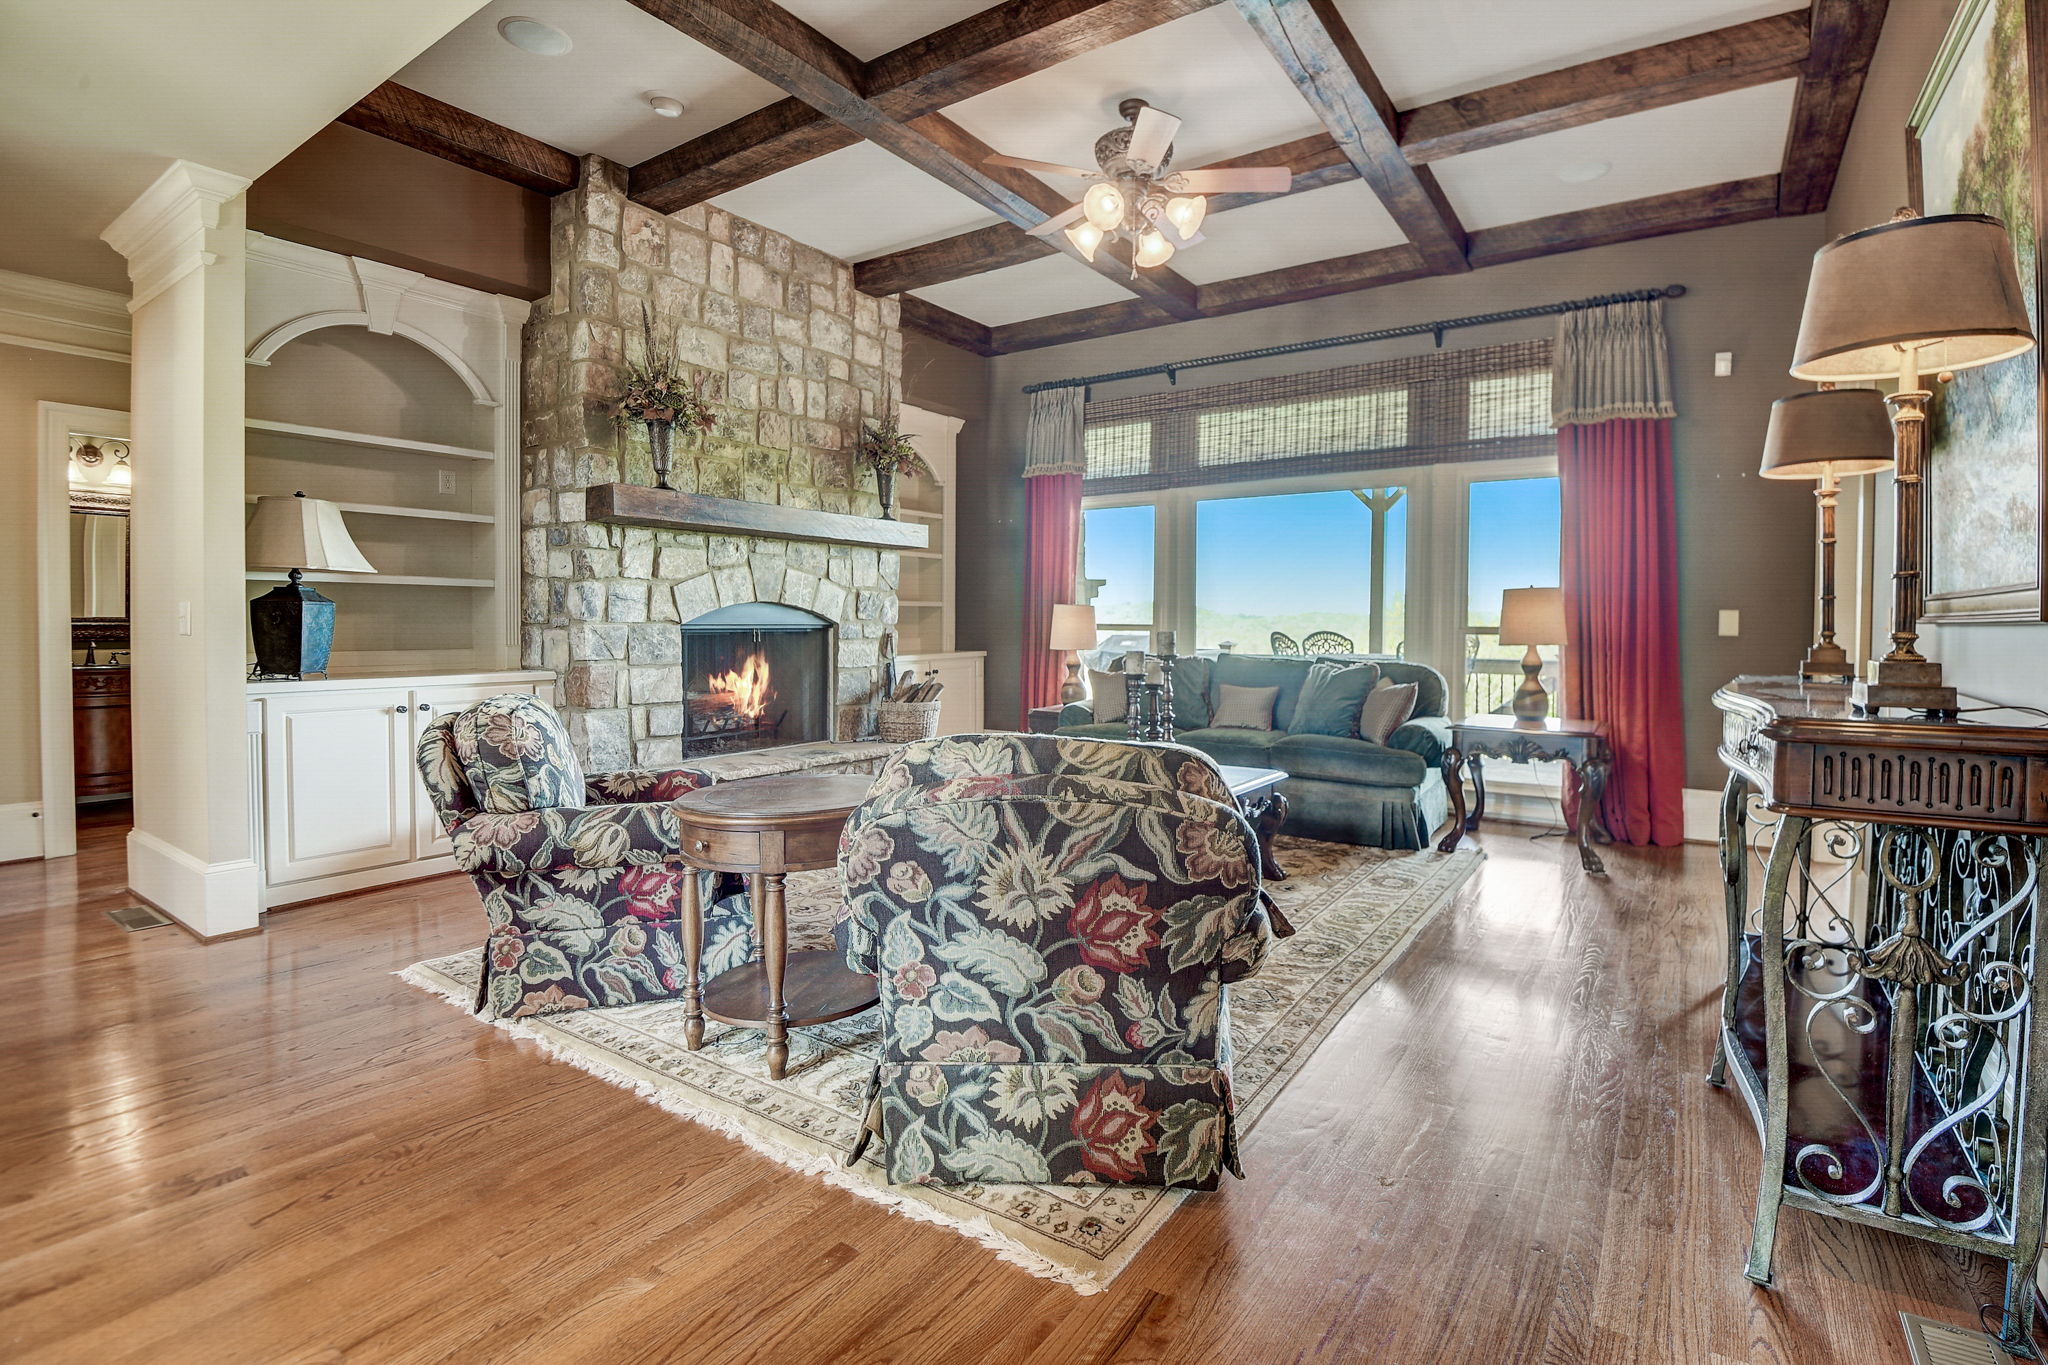 Spacious Living Room with Coffered Ceiling Made with REAL Cedar Beams, Stately Fireplace and Built-in's!